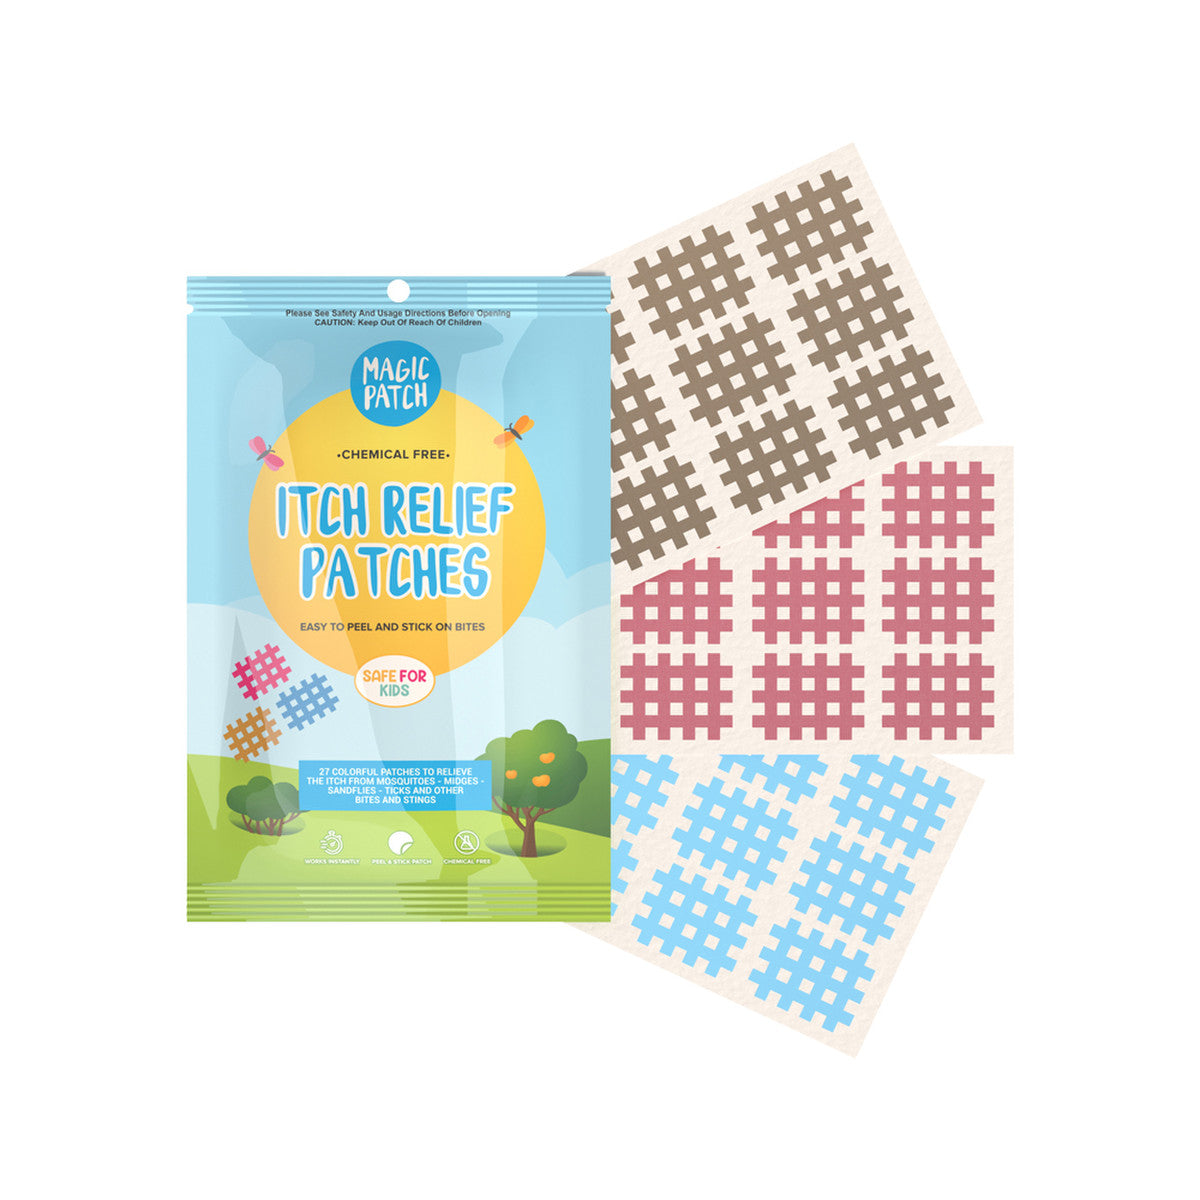 The Natural Patch Co. - Magic Patch Itch Relief Patches